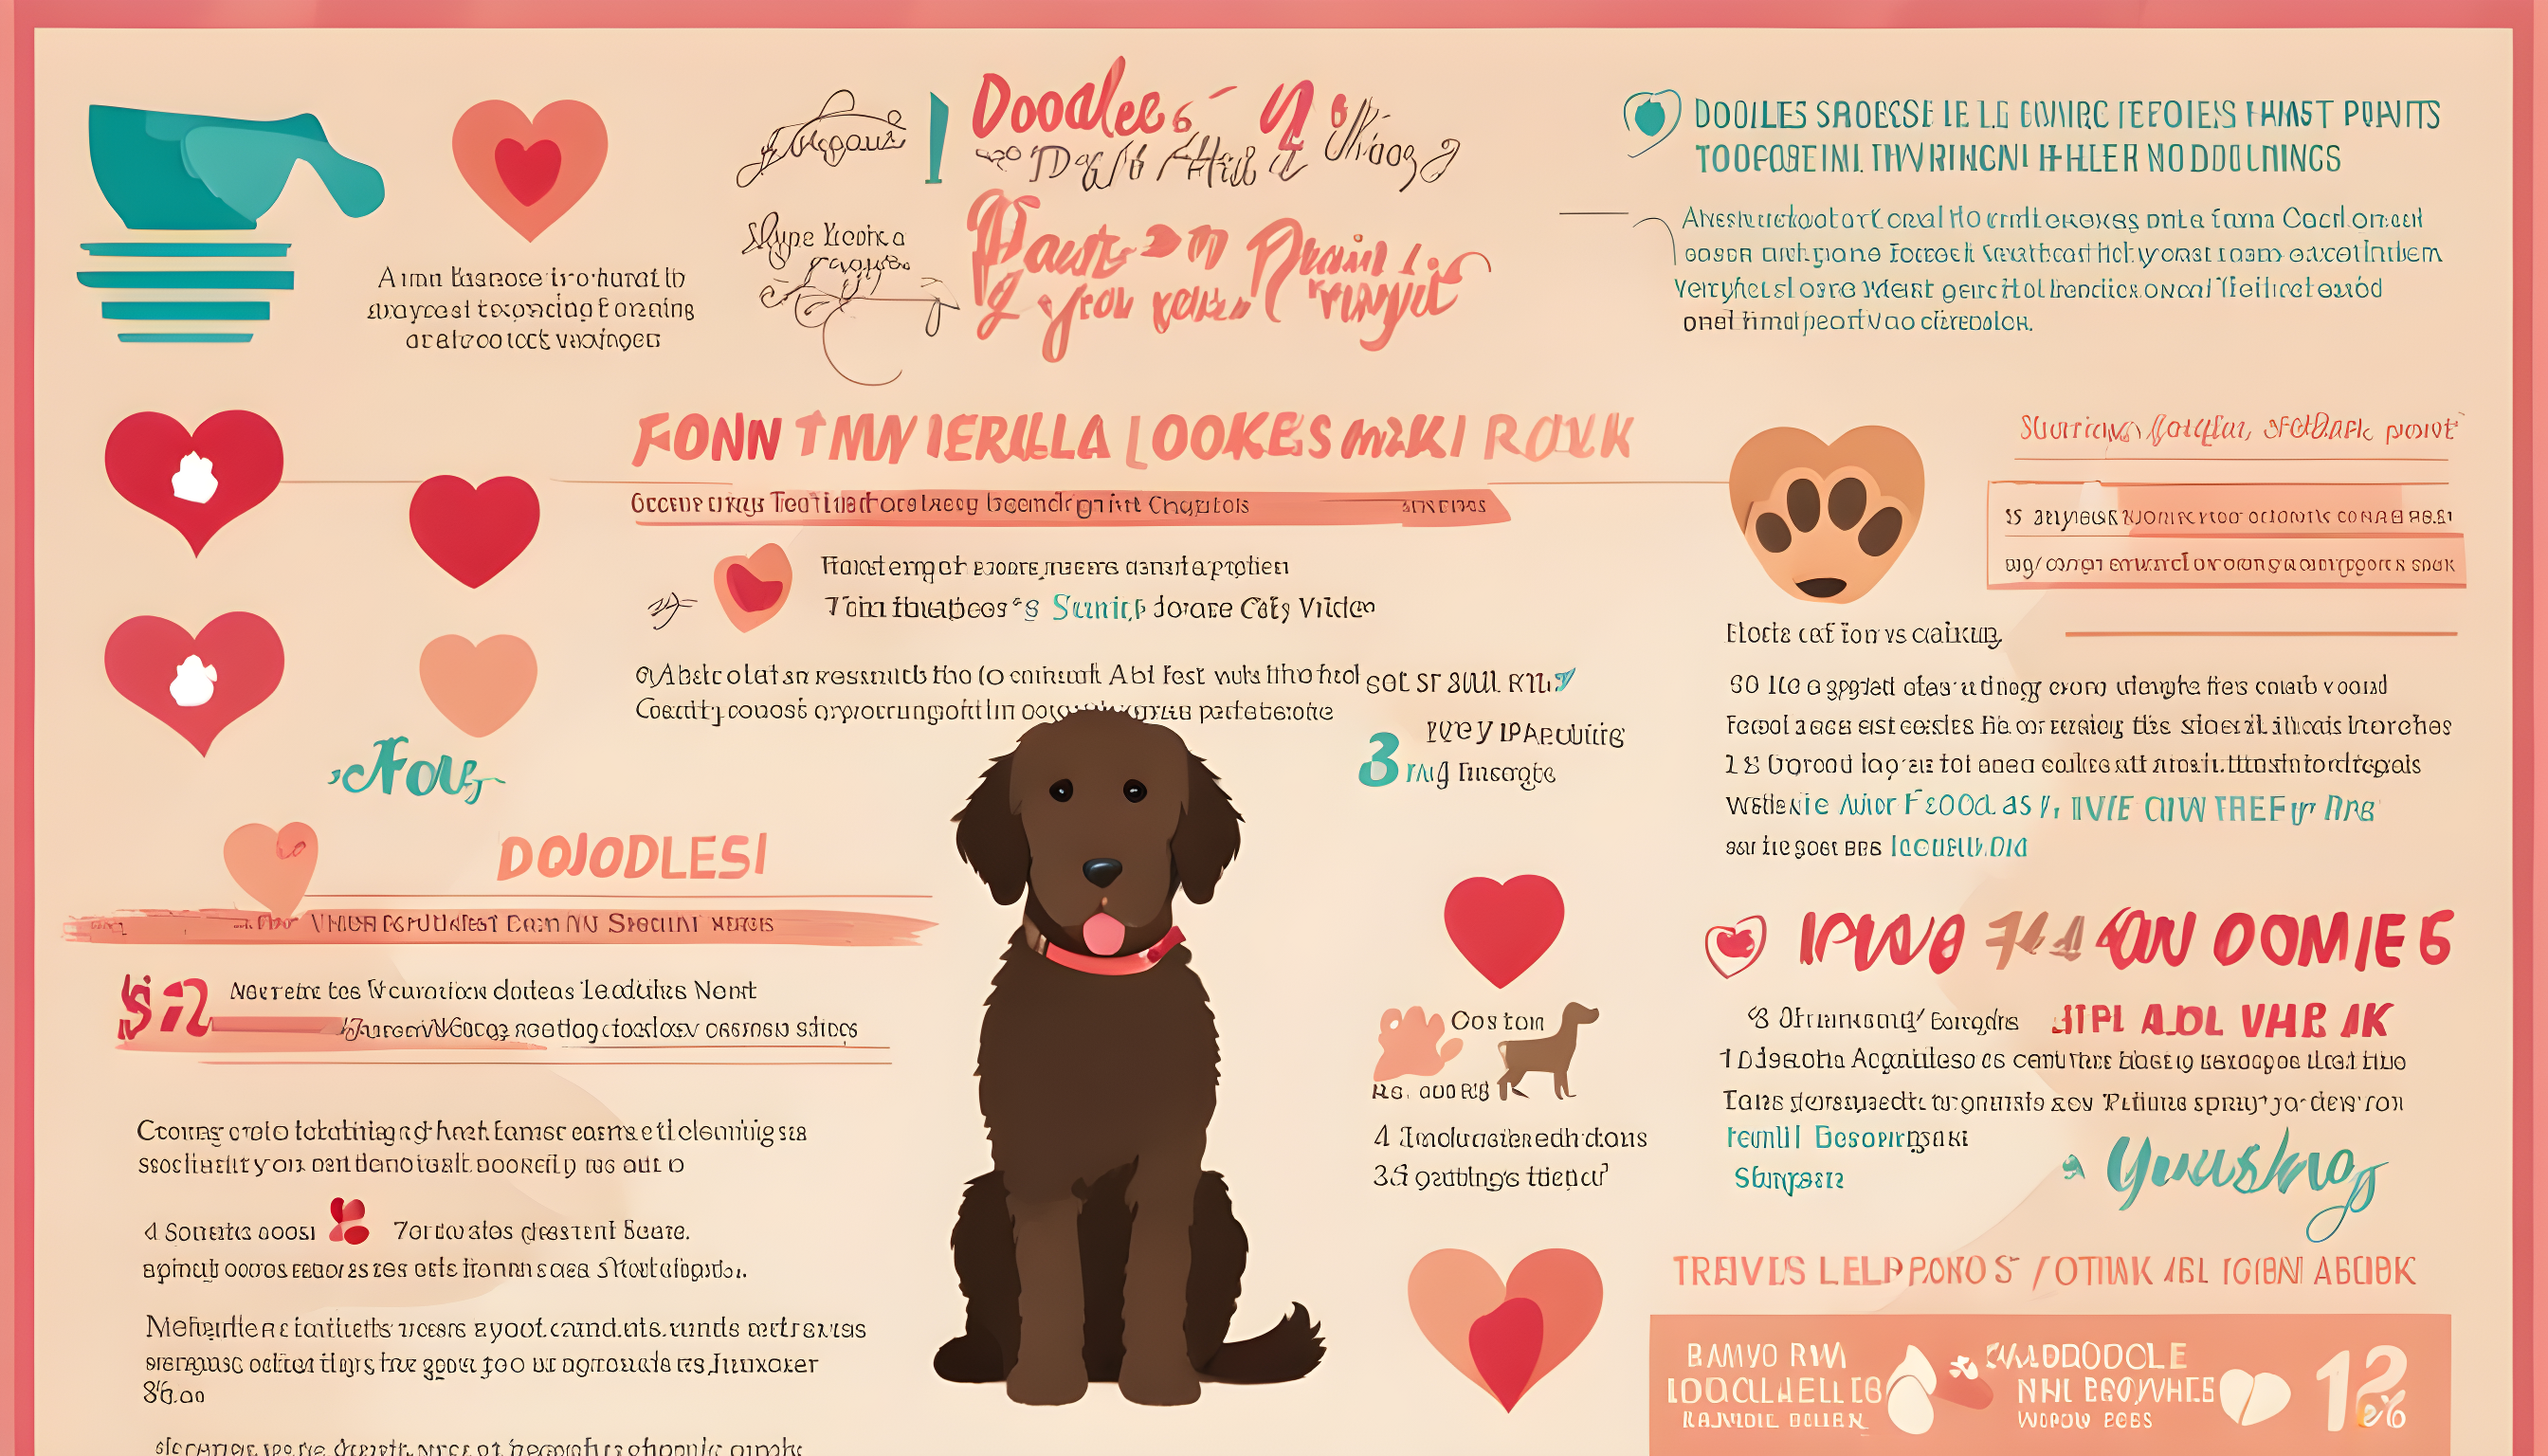 An infographic showing doodles, hearts, and paw prints with Labradoodle facts.